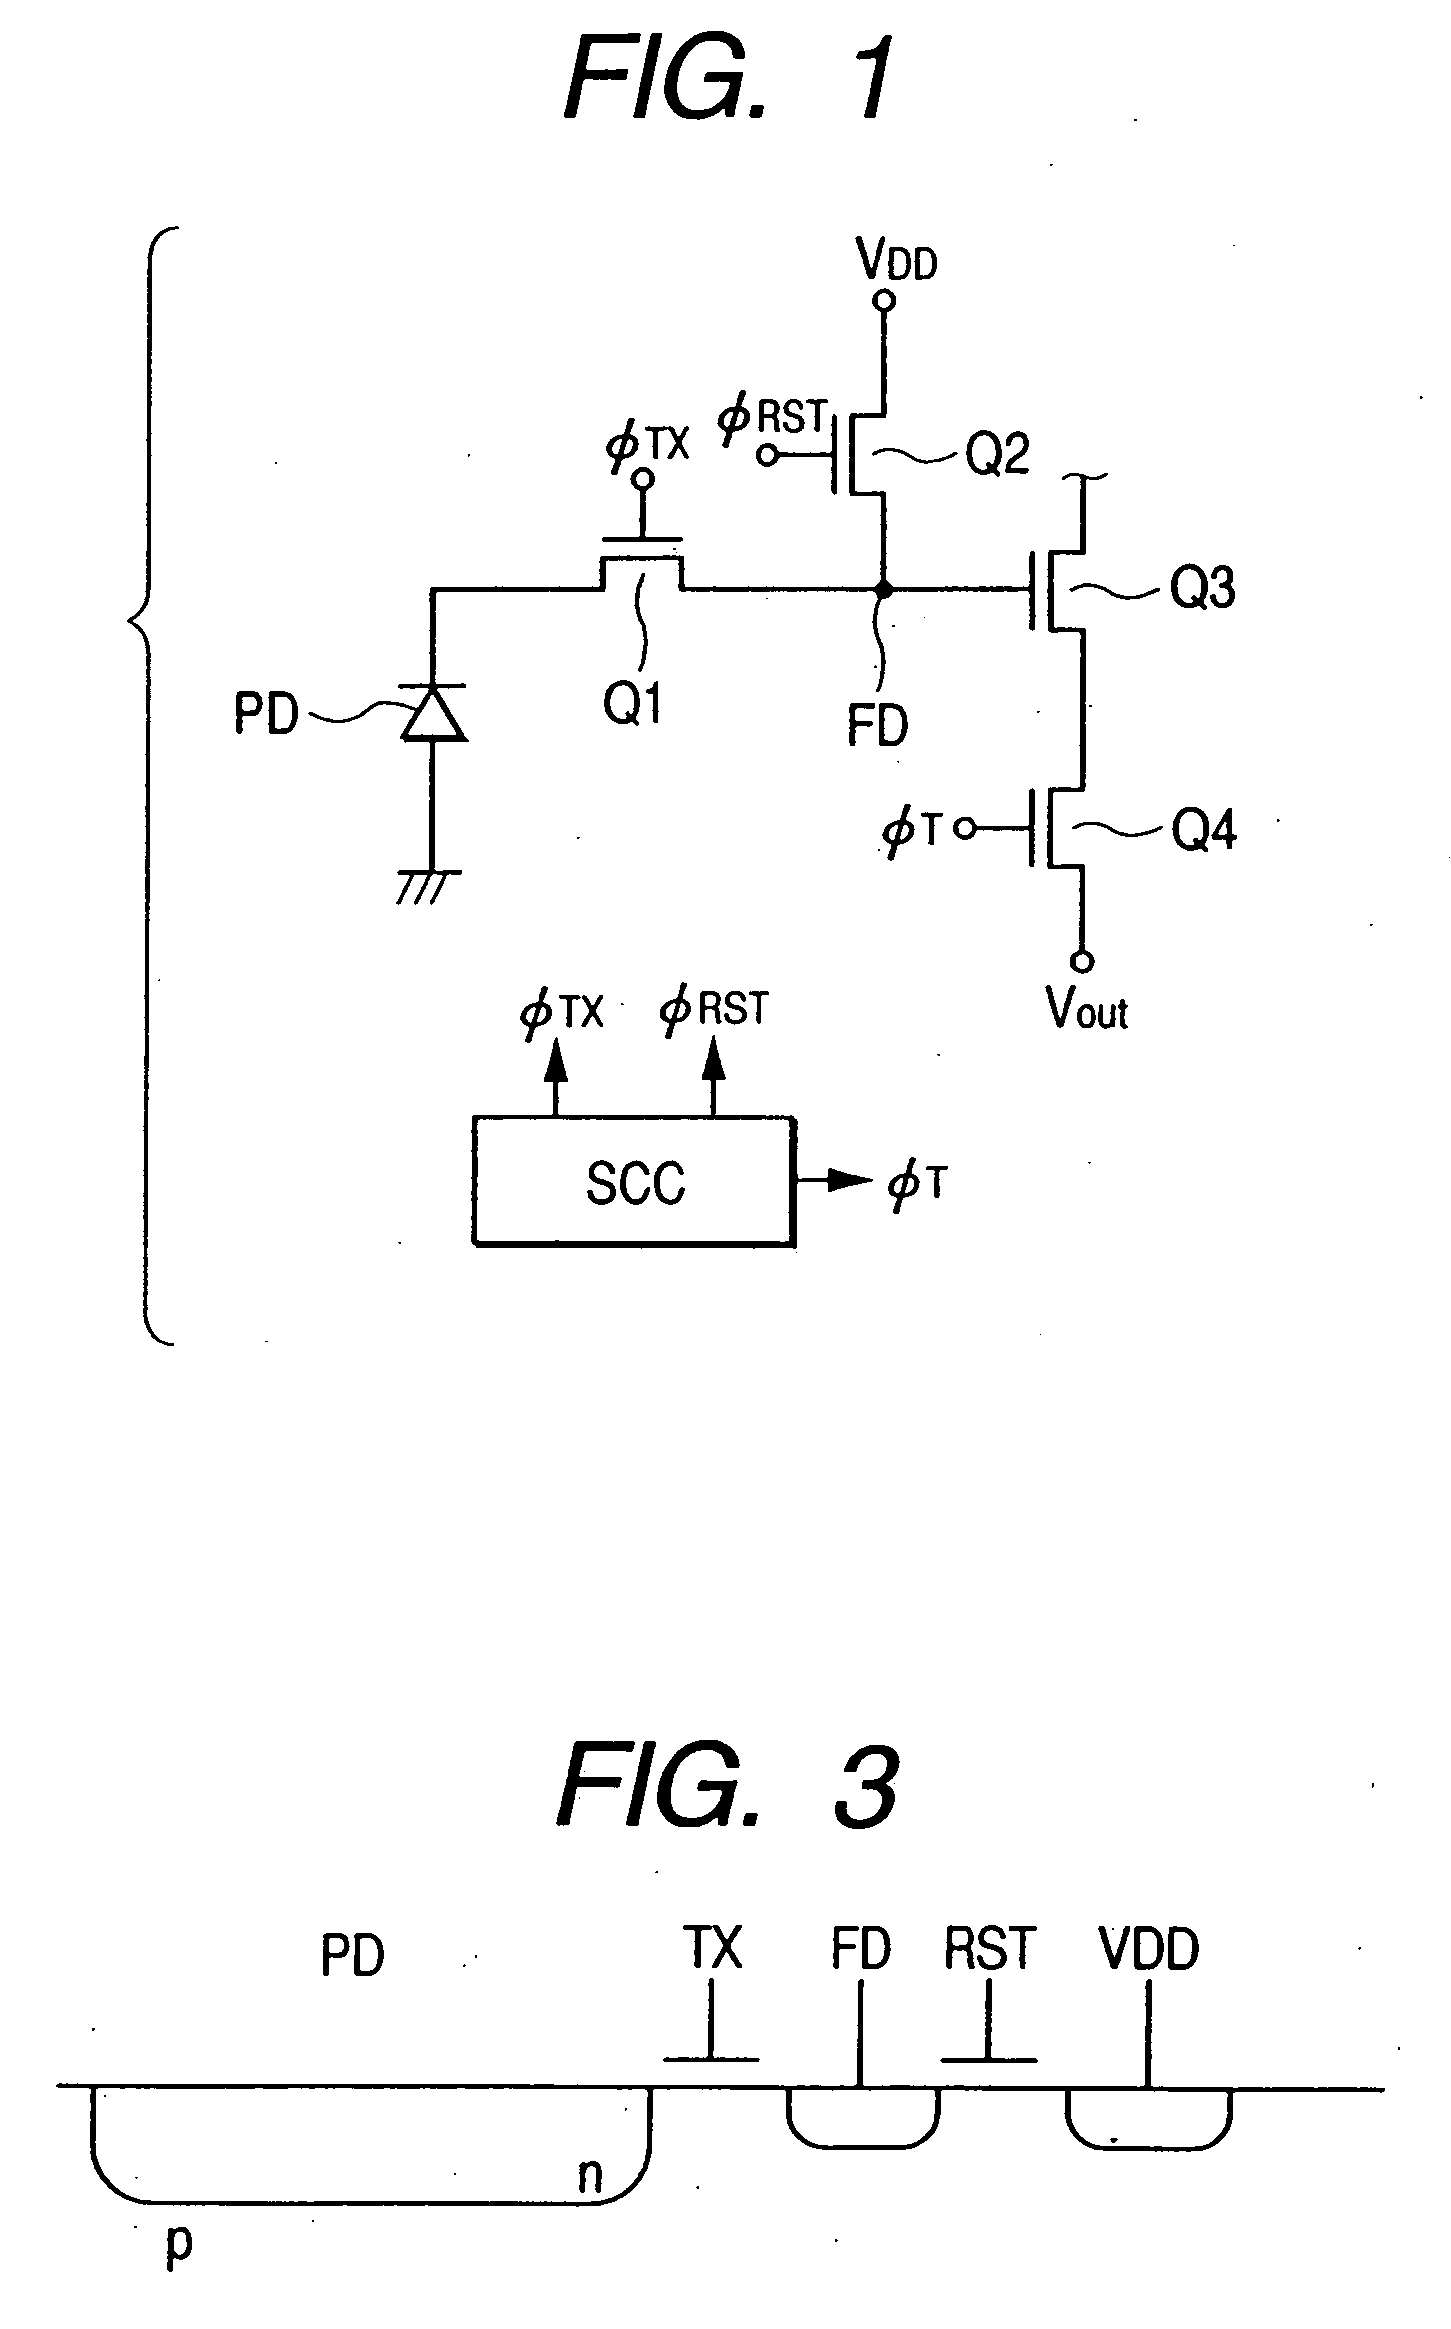 Solid-state image pickup device and method of resetting the same